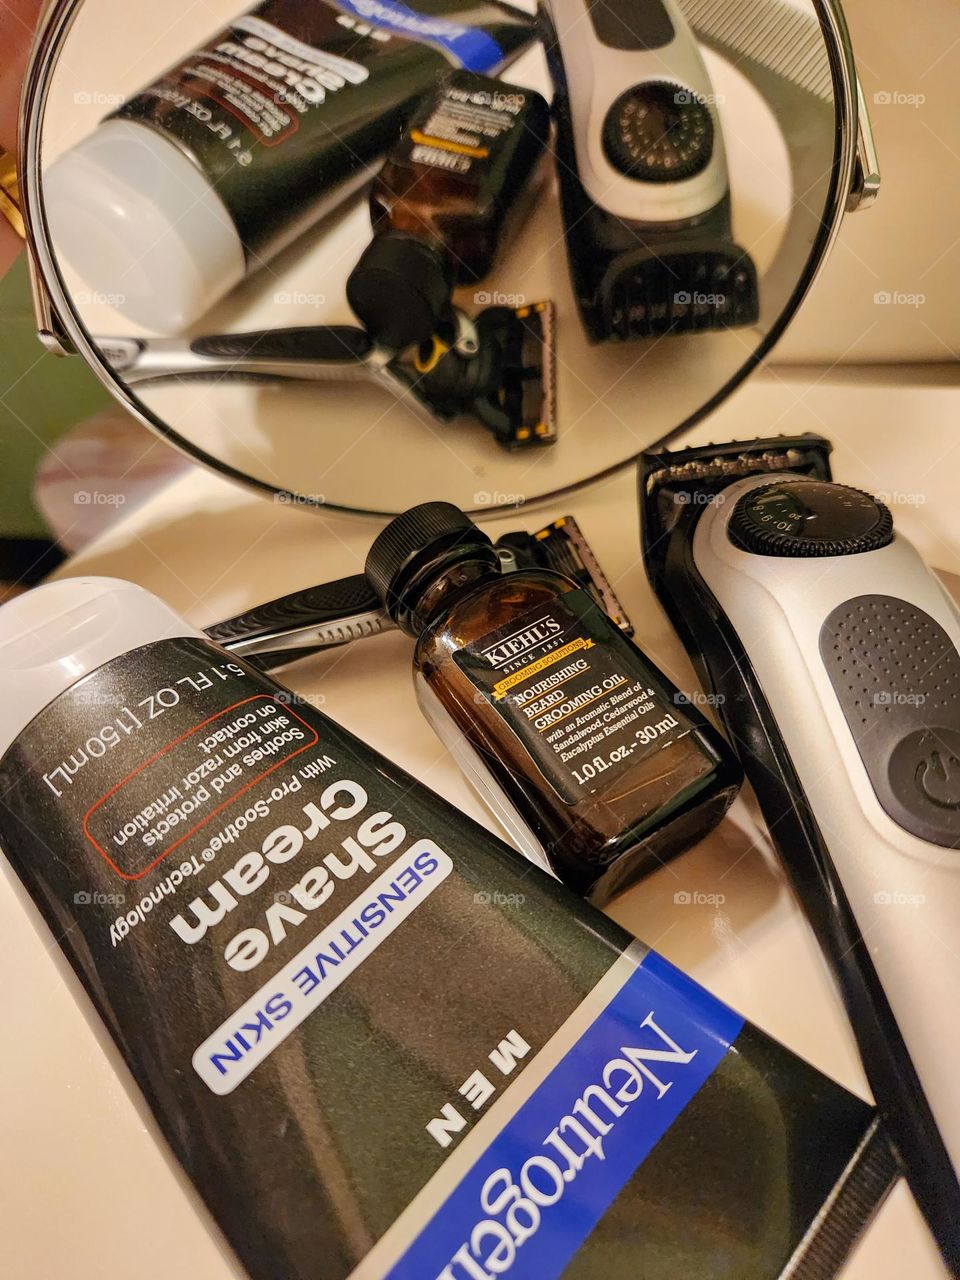 shaving products